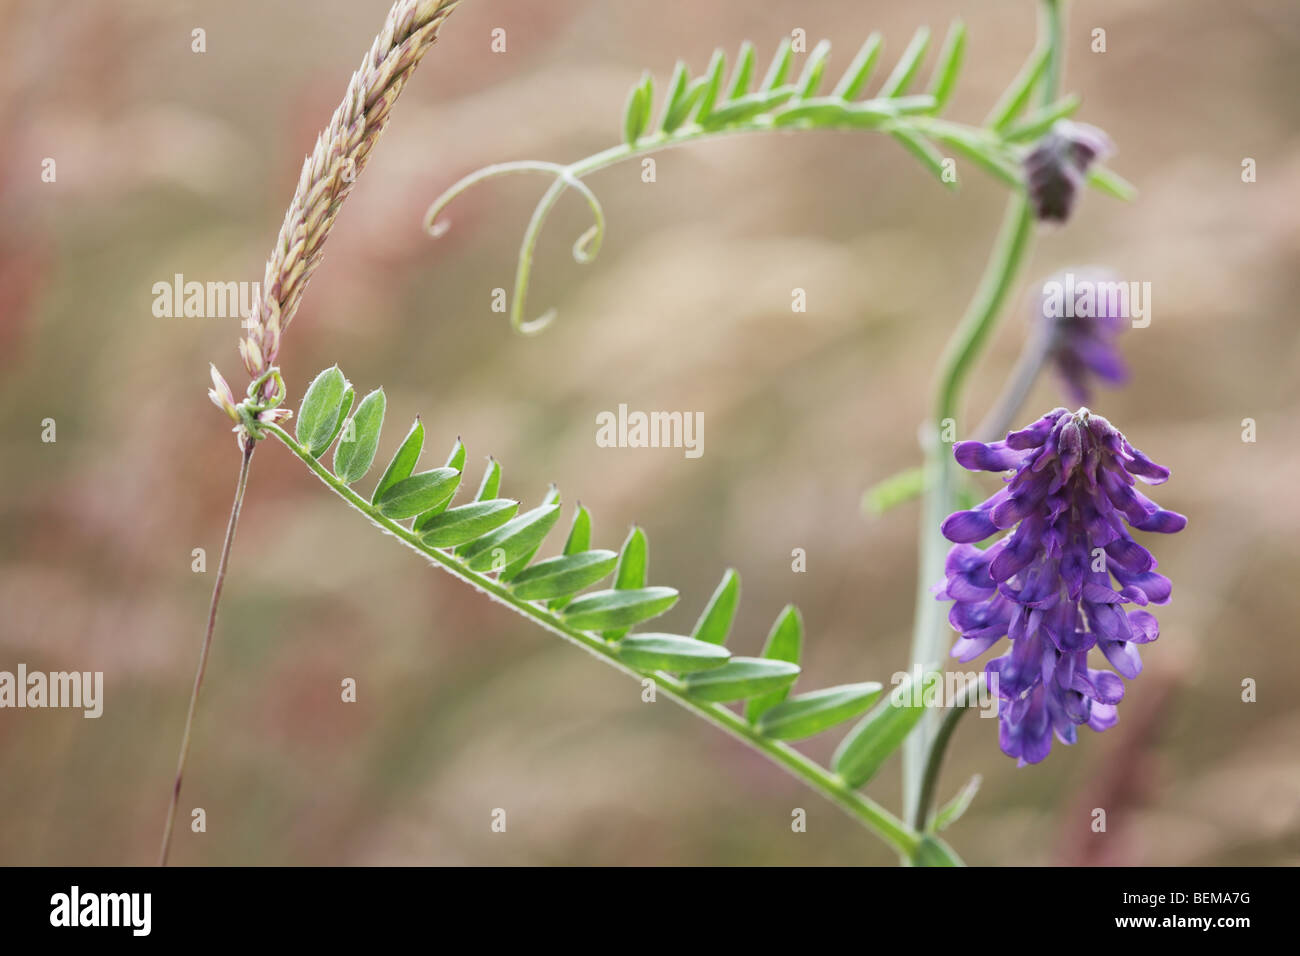 Tufted vetch sending out tendrils. Stock Photo